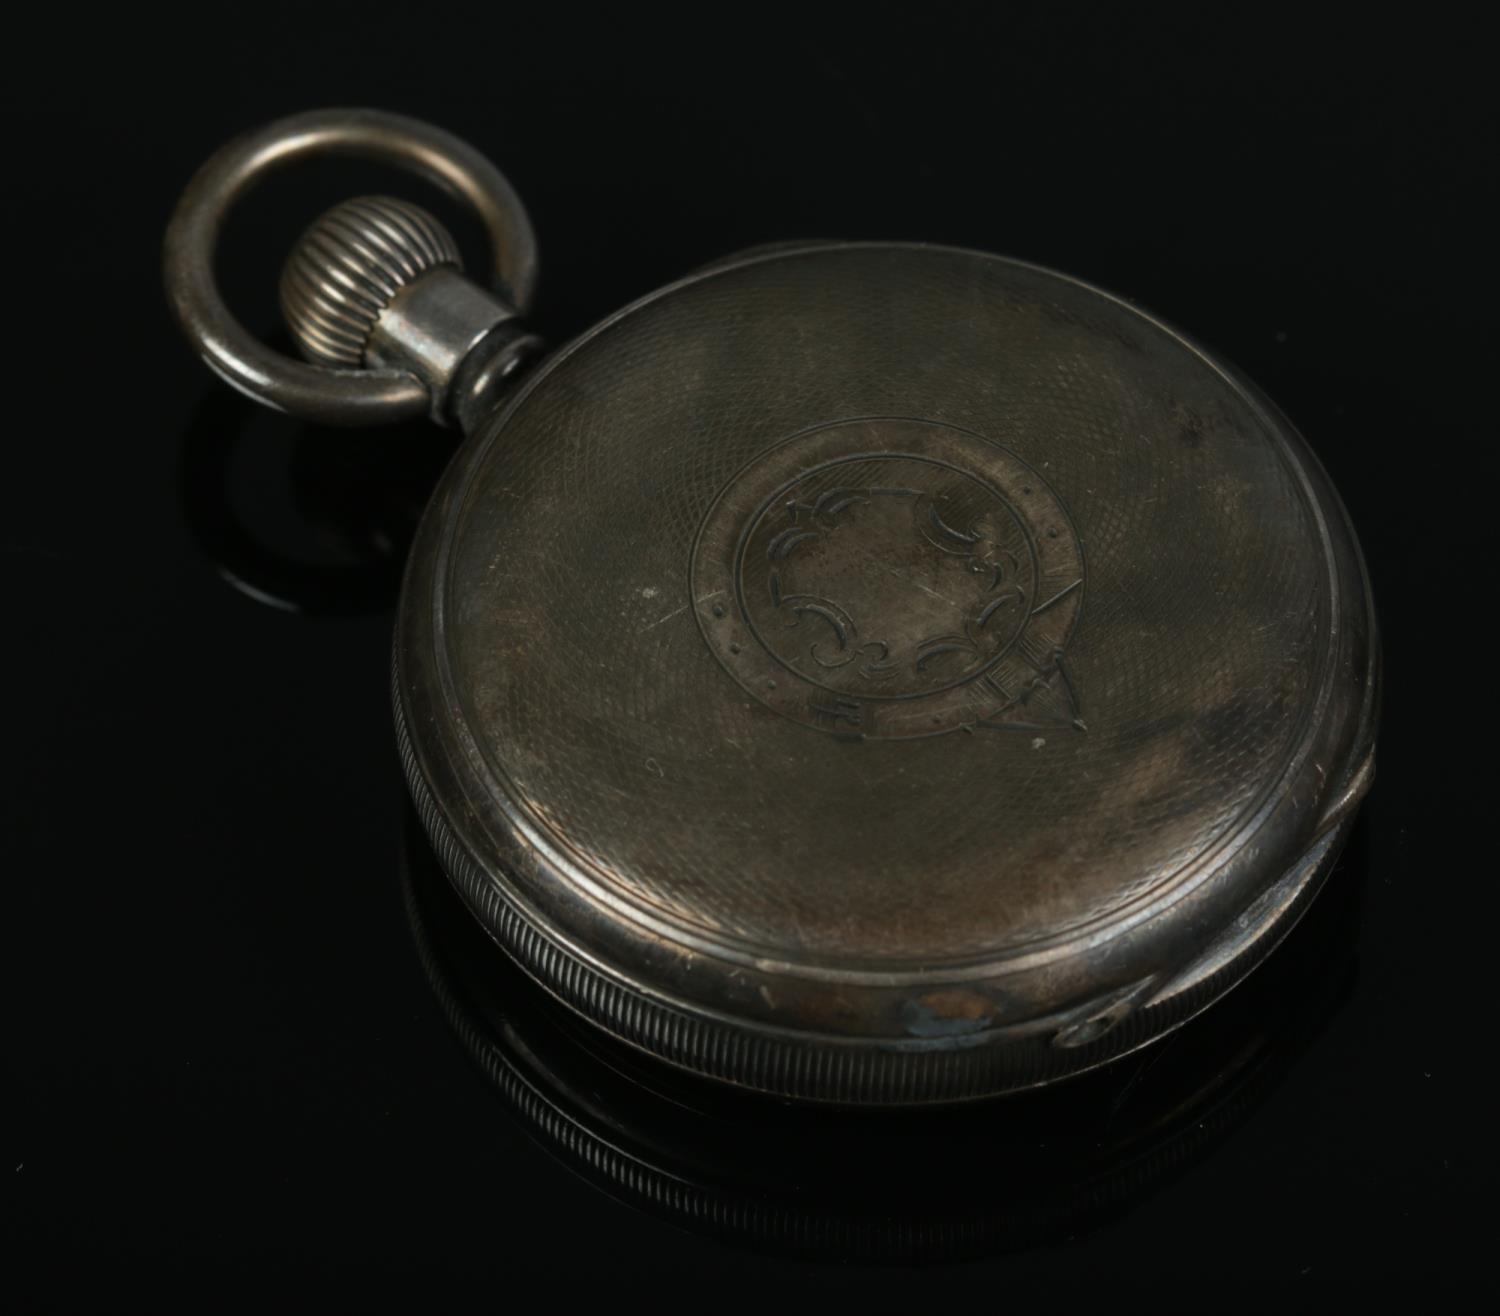 A silver cased American Watch Company Waltham Mass open face pocket watch, with Roman Numeral face - Image 2 of 3